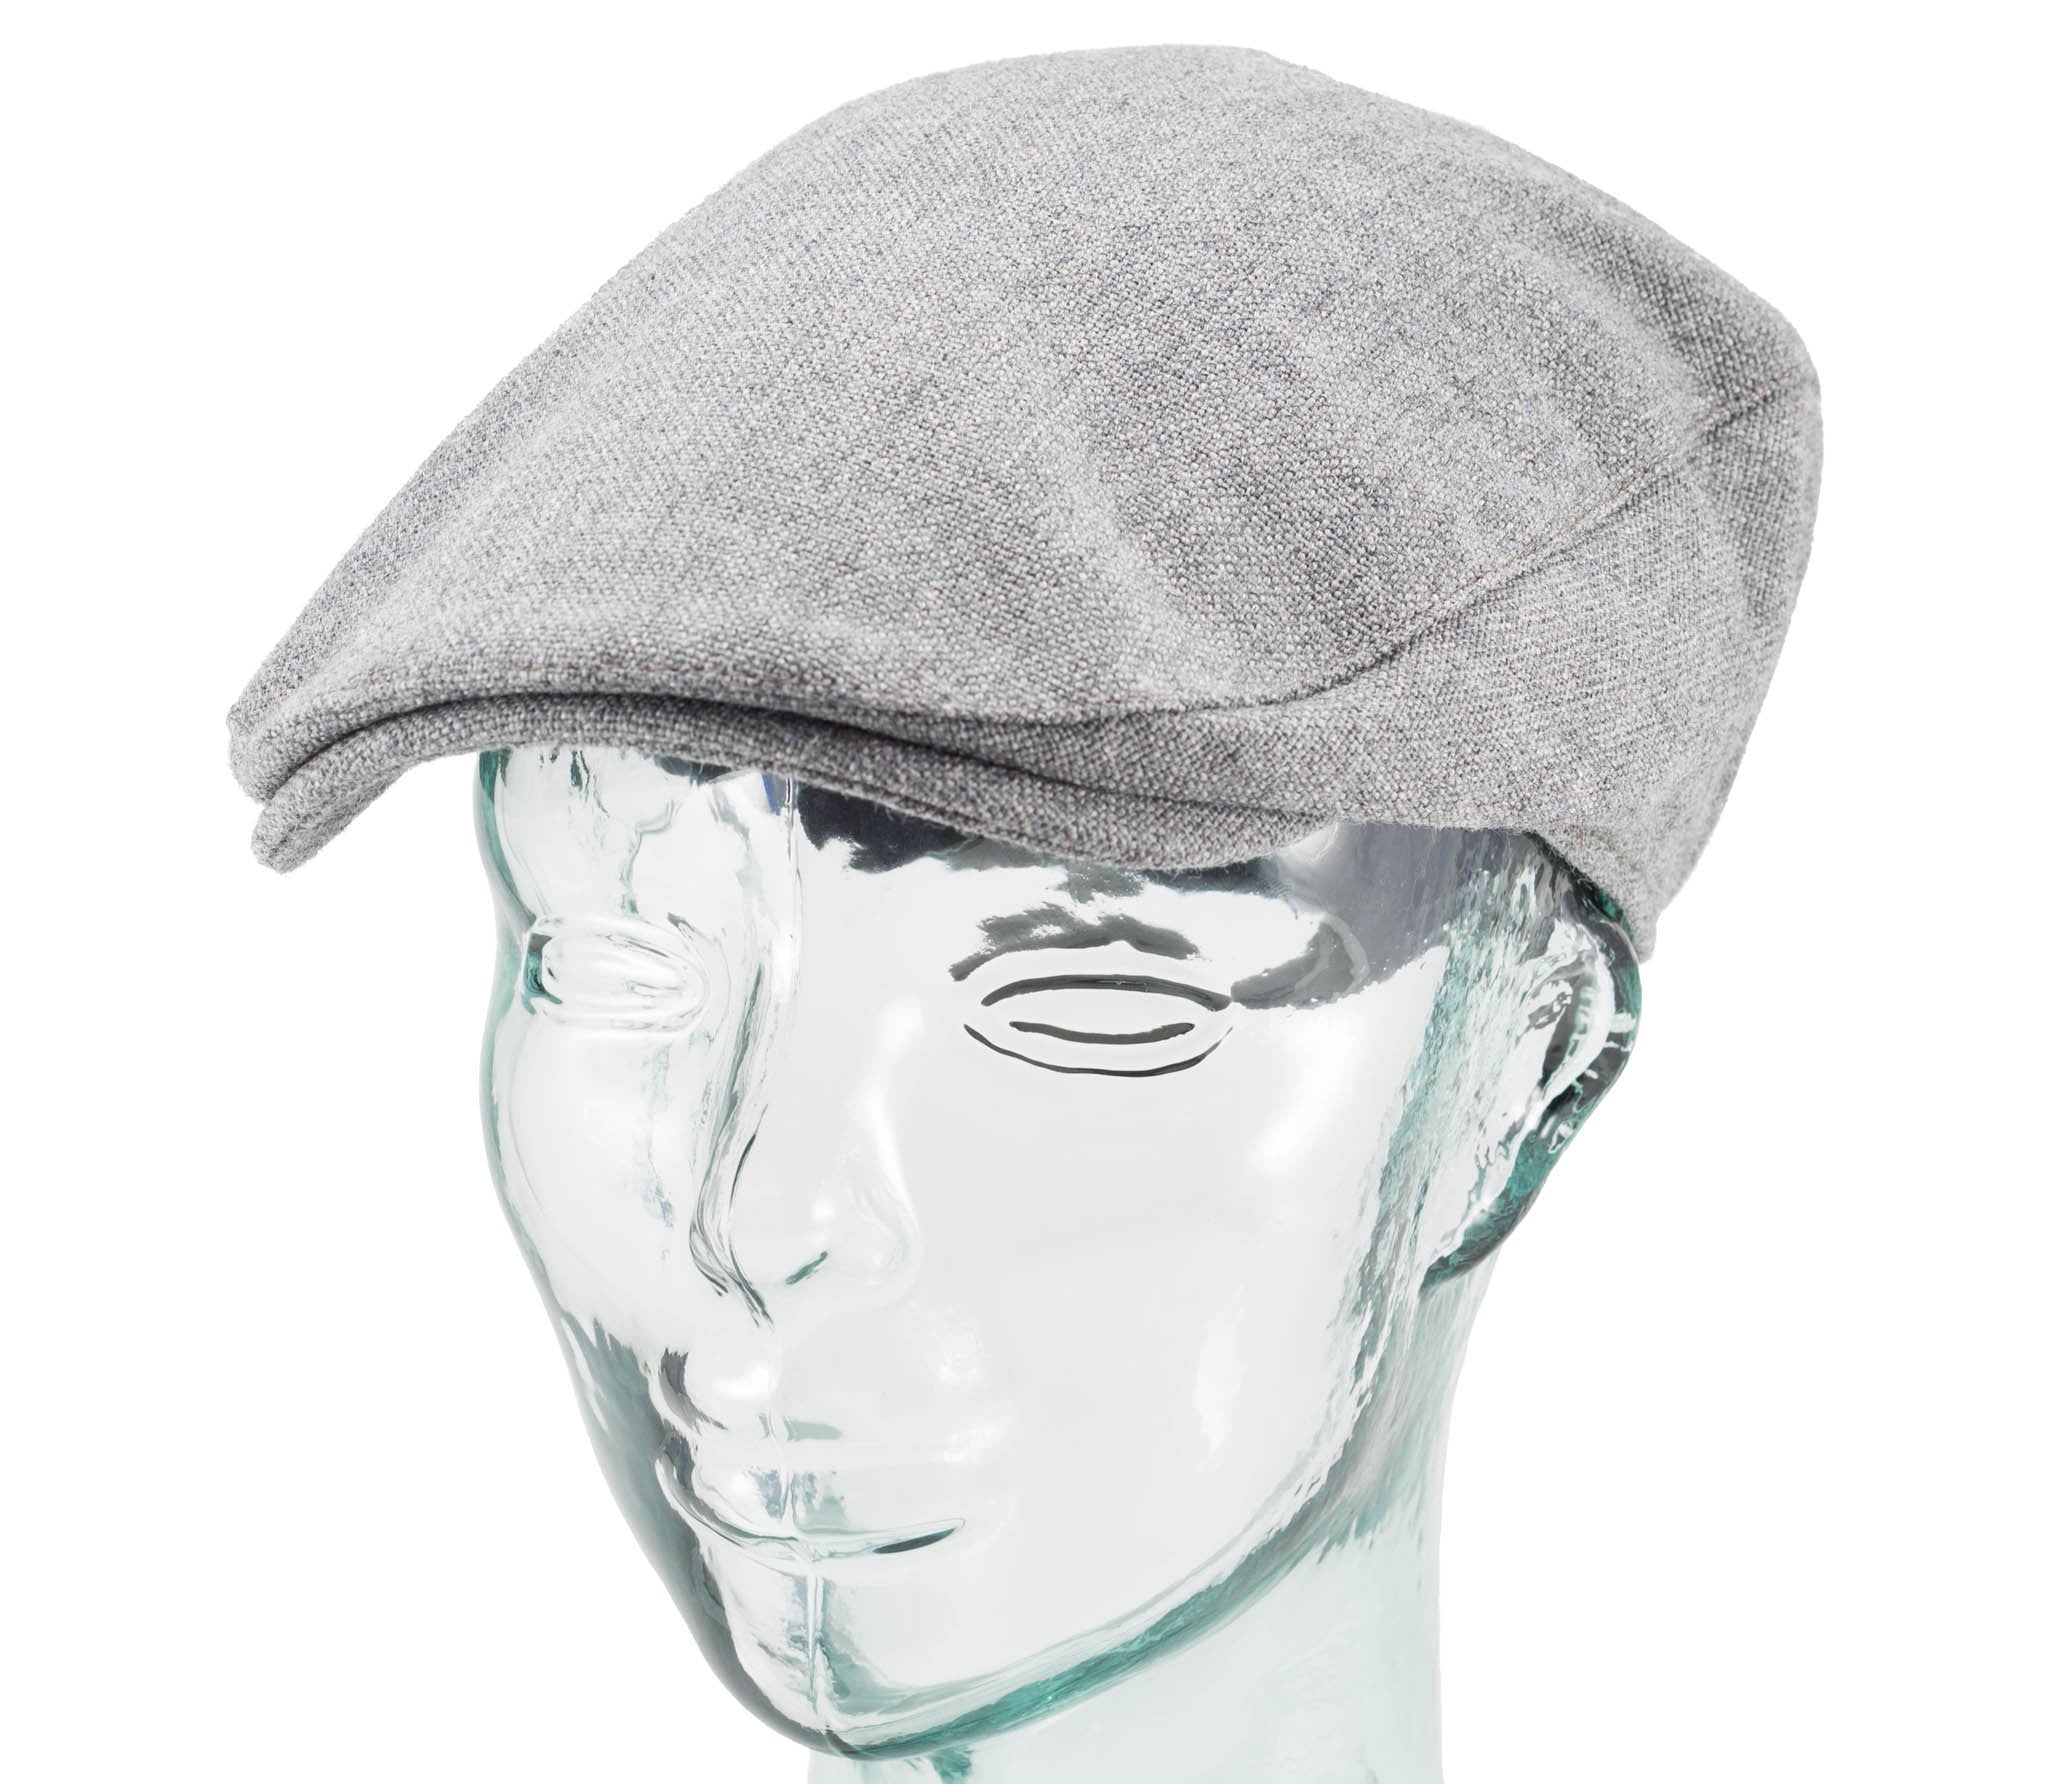 Solid Color Tweed - Donegal Touring Cap